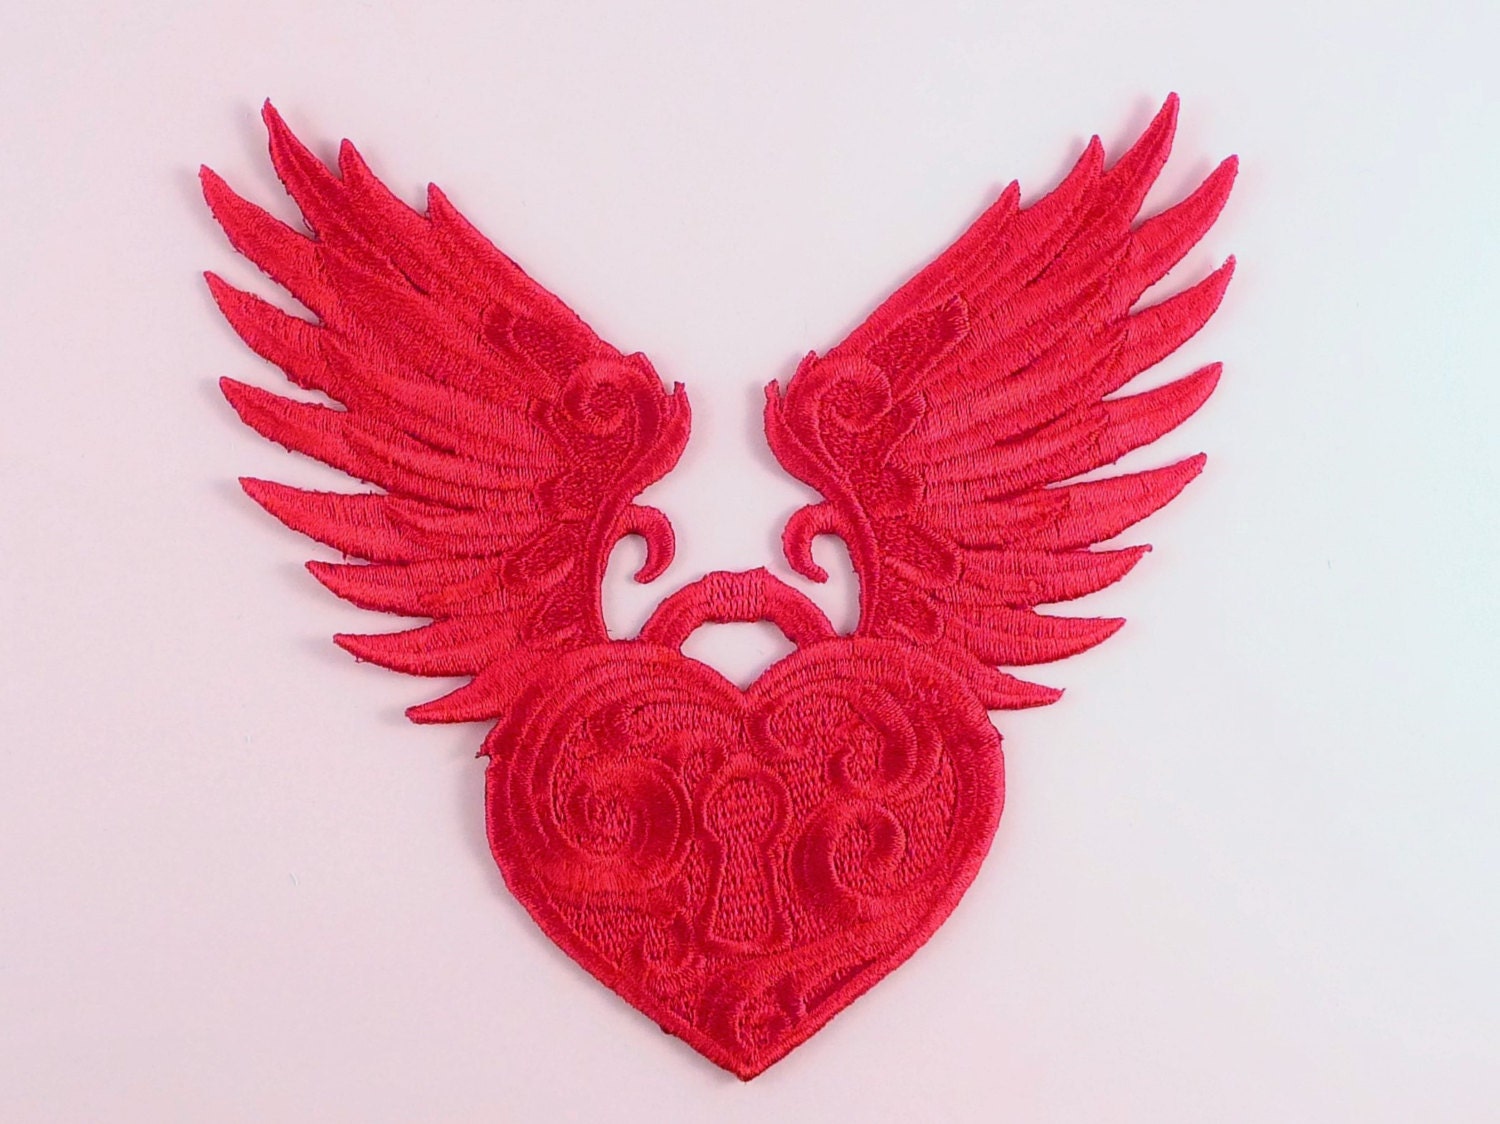 Winged Heart in BLACK Iron On Patch Applique